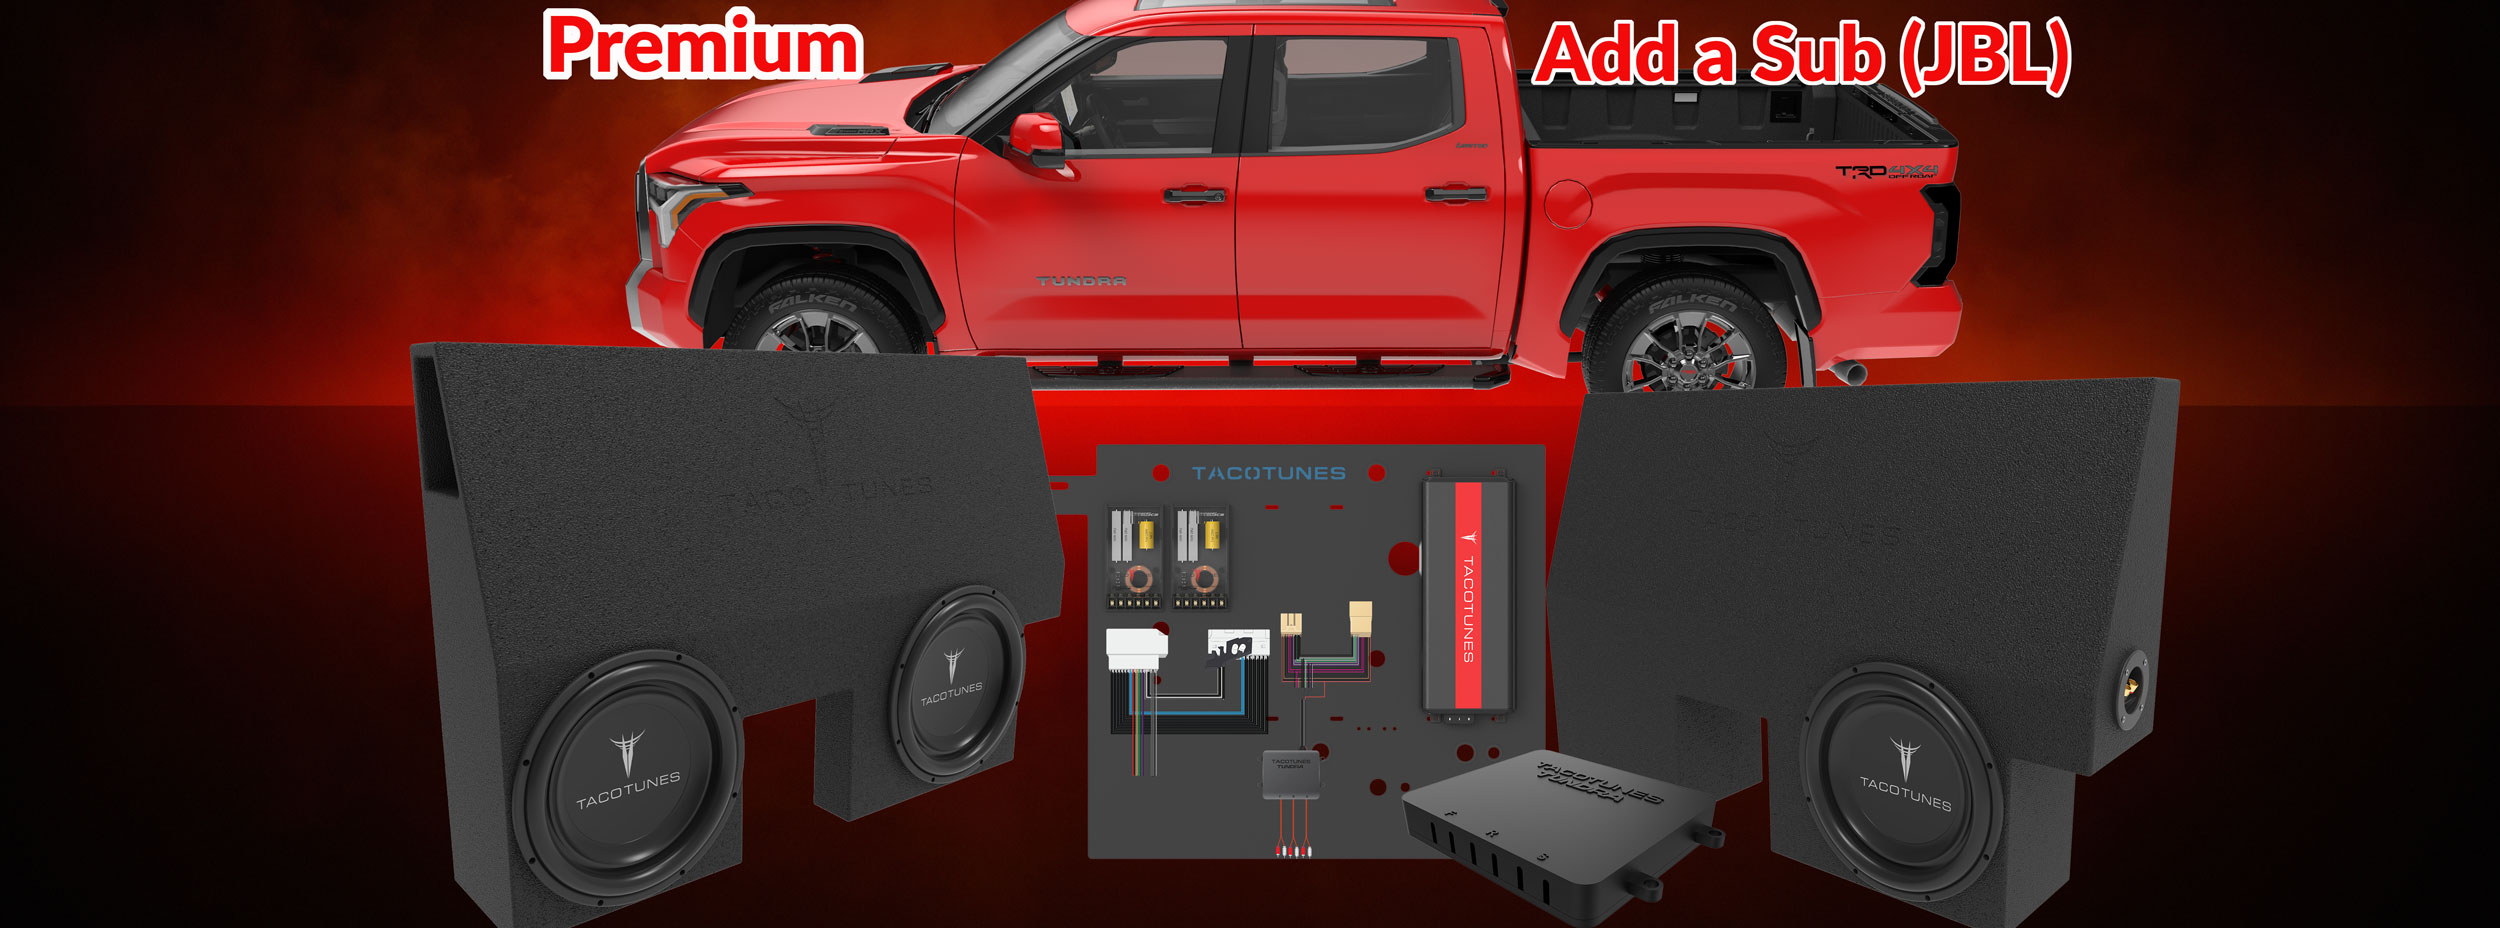 2022 Toyota Tundra JBL Add A Subwoofer Package